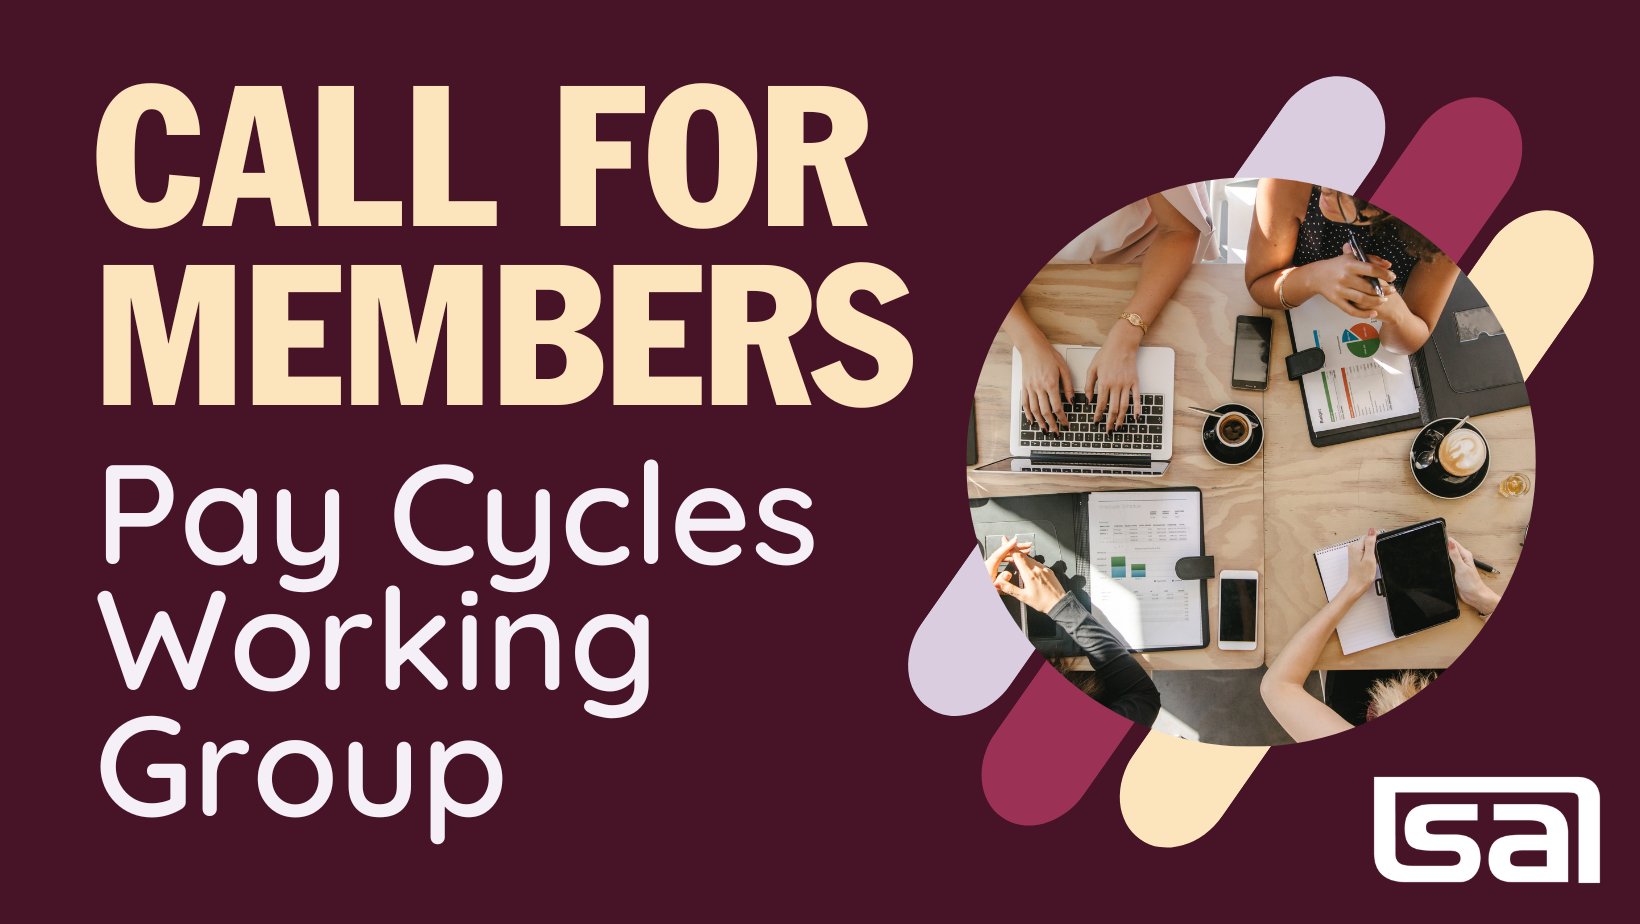 Call for members: Pay Cycles Working Group